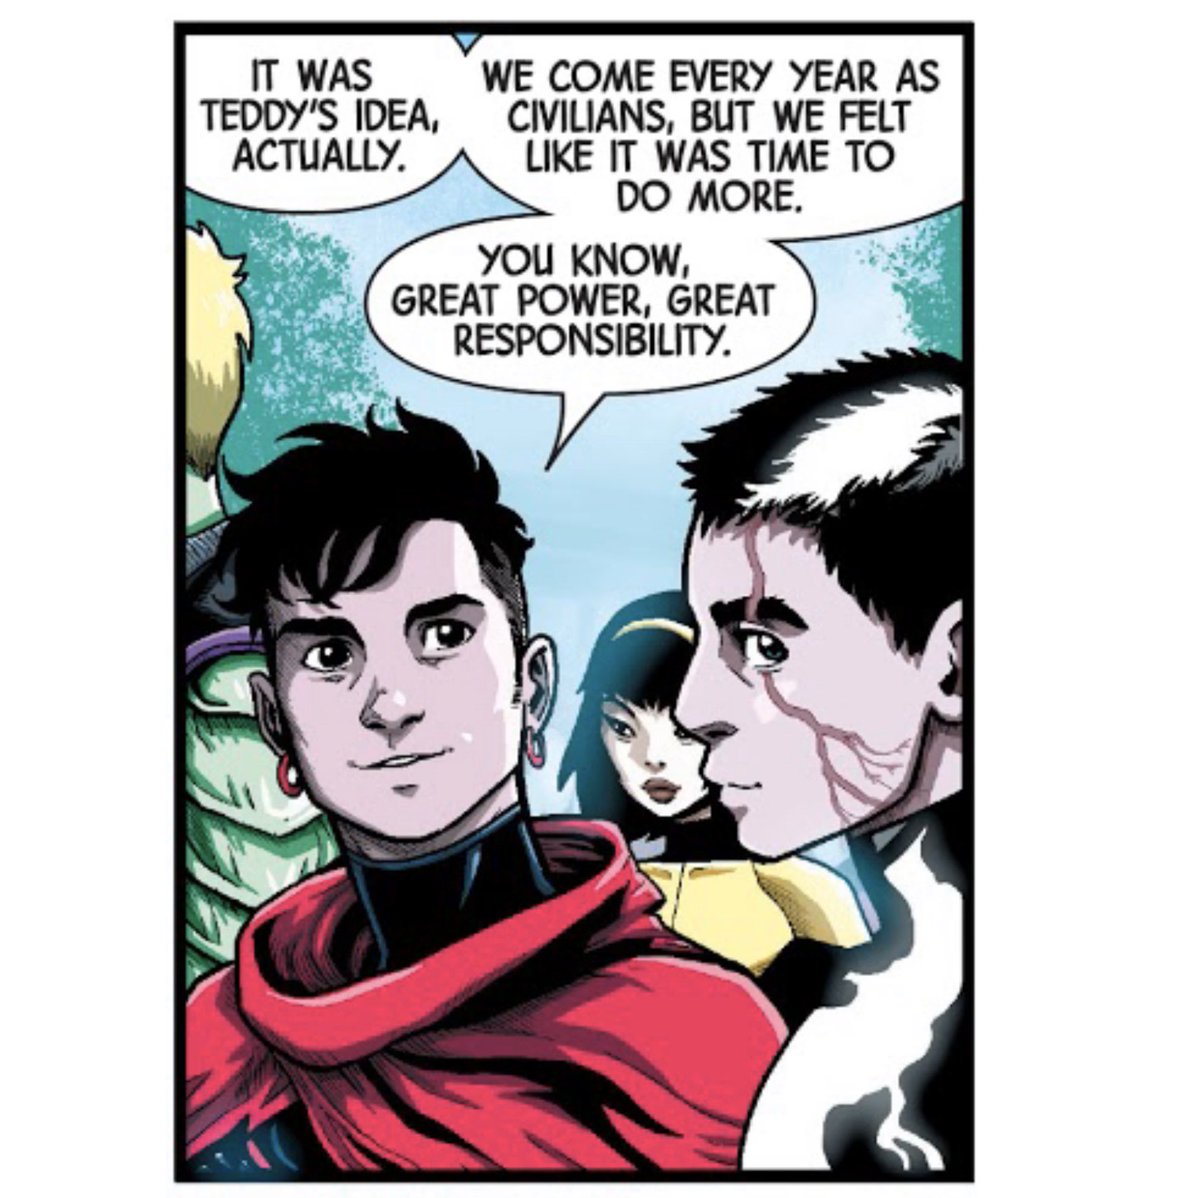 Responding is Wiccan, a guy with a similar background, even similar looks, but socially aware. He gives credit to his partner Hulkling for bringing everyone together. Hulkling is a prophesied unifier, and I like to think he’s developing that diplomatic skill.